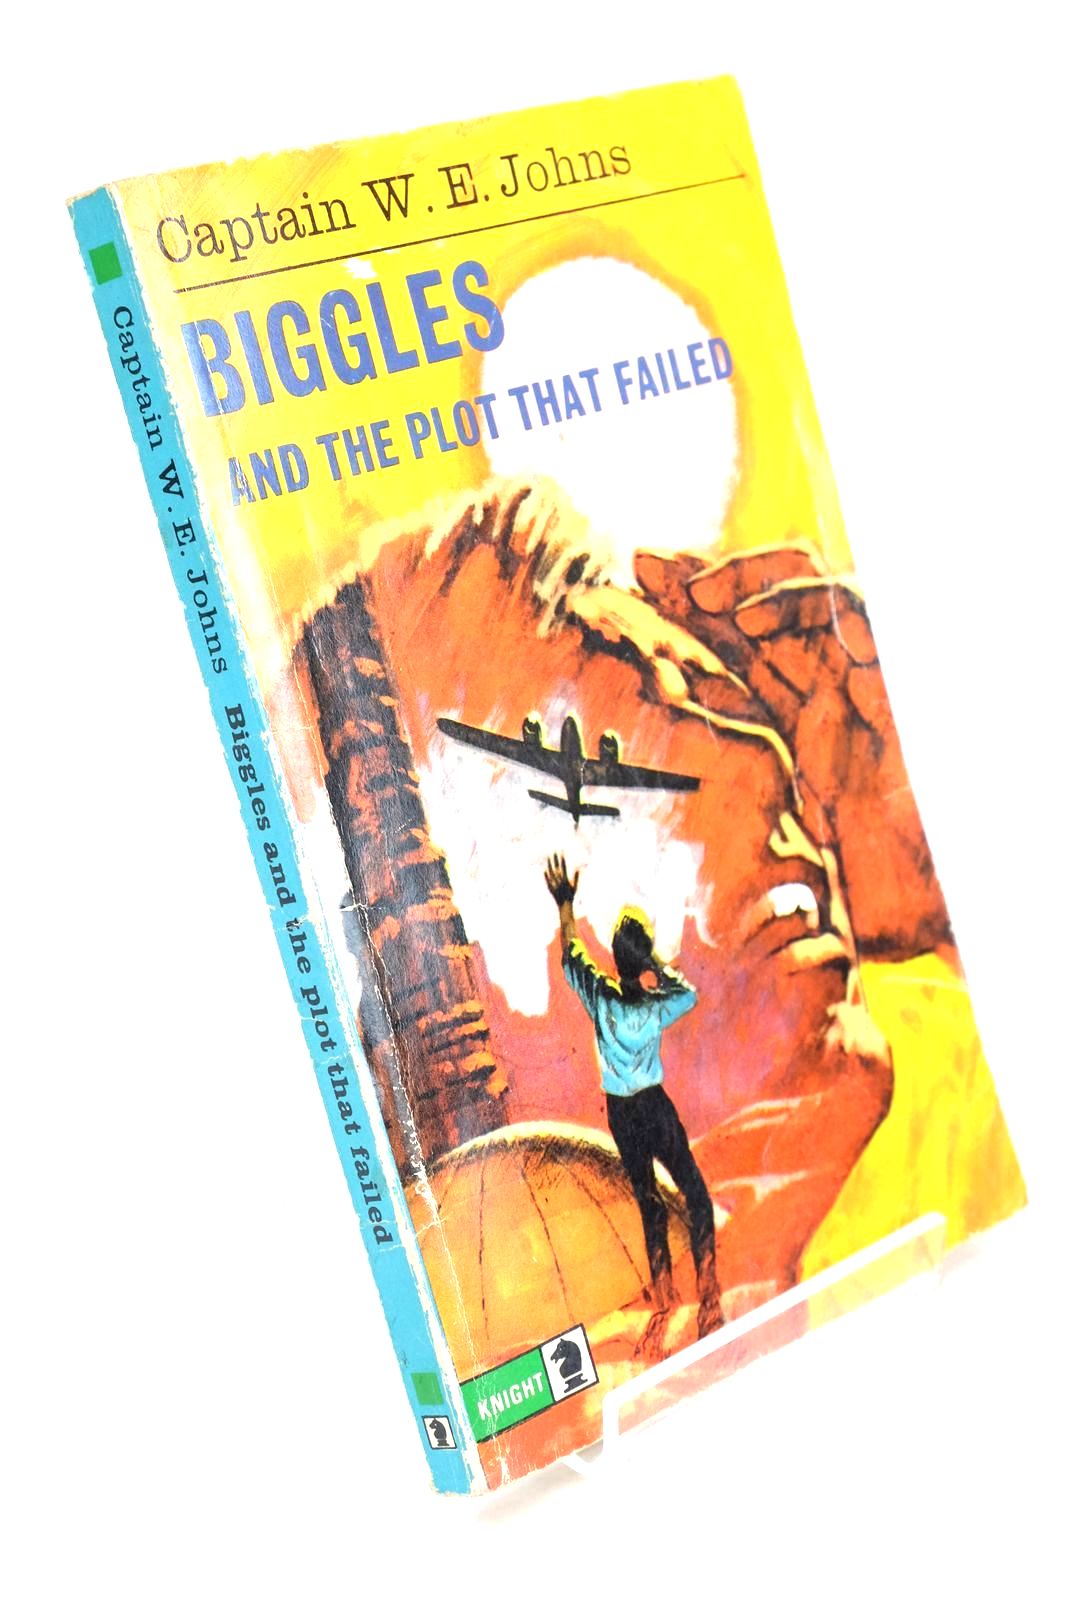 Photo of BIGGLES AND THE PLOT THAT FAILED written by Johns, W.E. published by Knight Books (STOCK CODE: 1324846)  for sale by Stella & Rose's Books